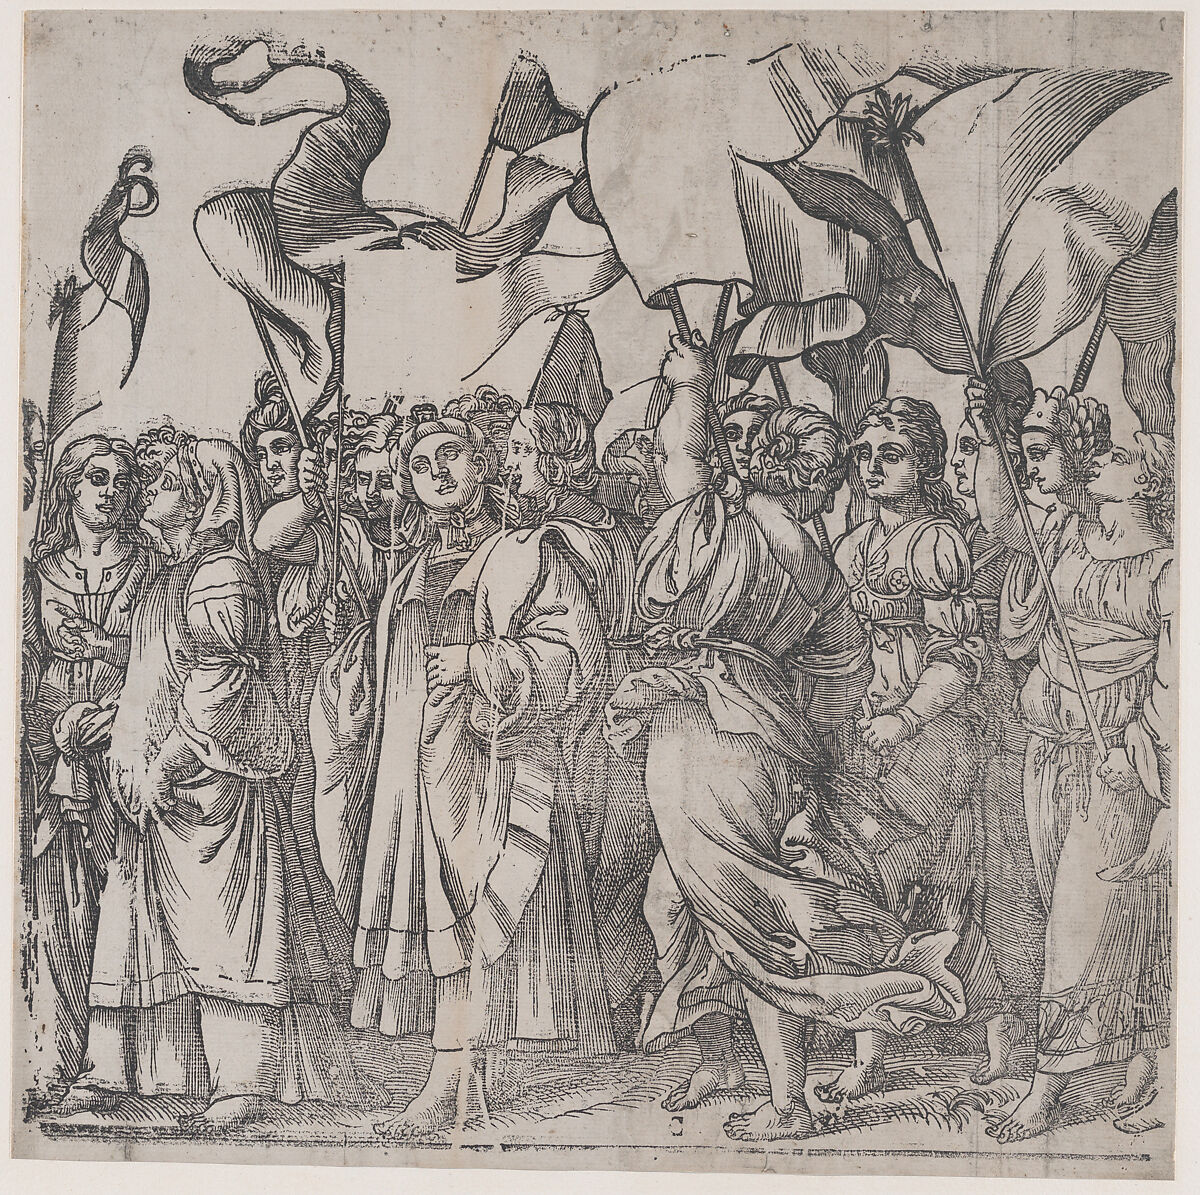 Section C: female martyrs and saints holding banners, from "The Triumph of Christ", Andrea Andreani (Italian, Mantua 1558/1559–1629), Lithograph copy of a woodcut 